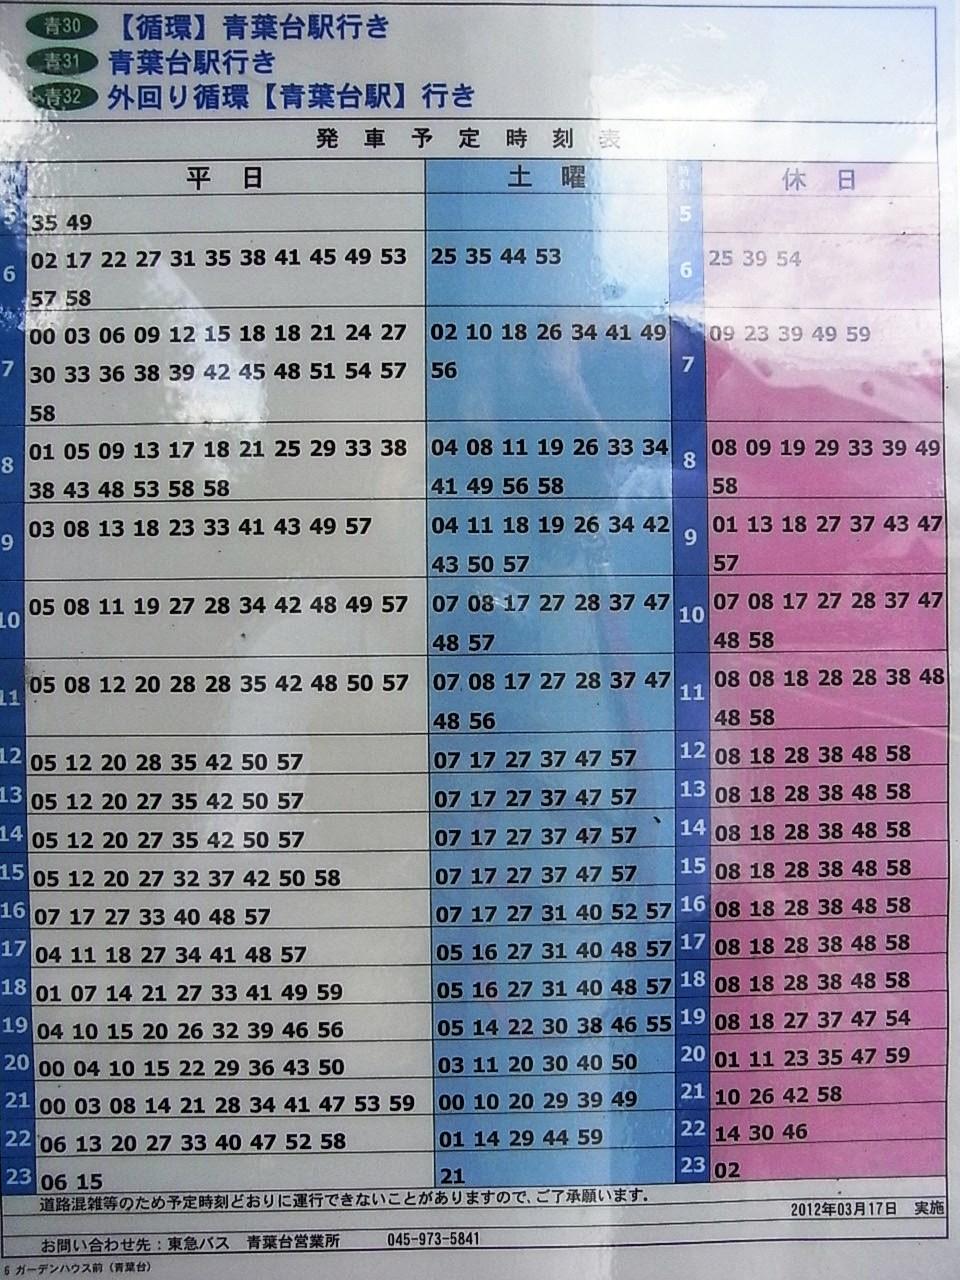 Other. The nearest bus stop timetable